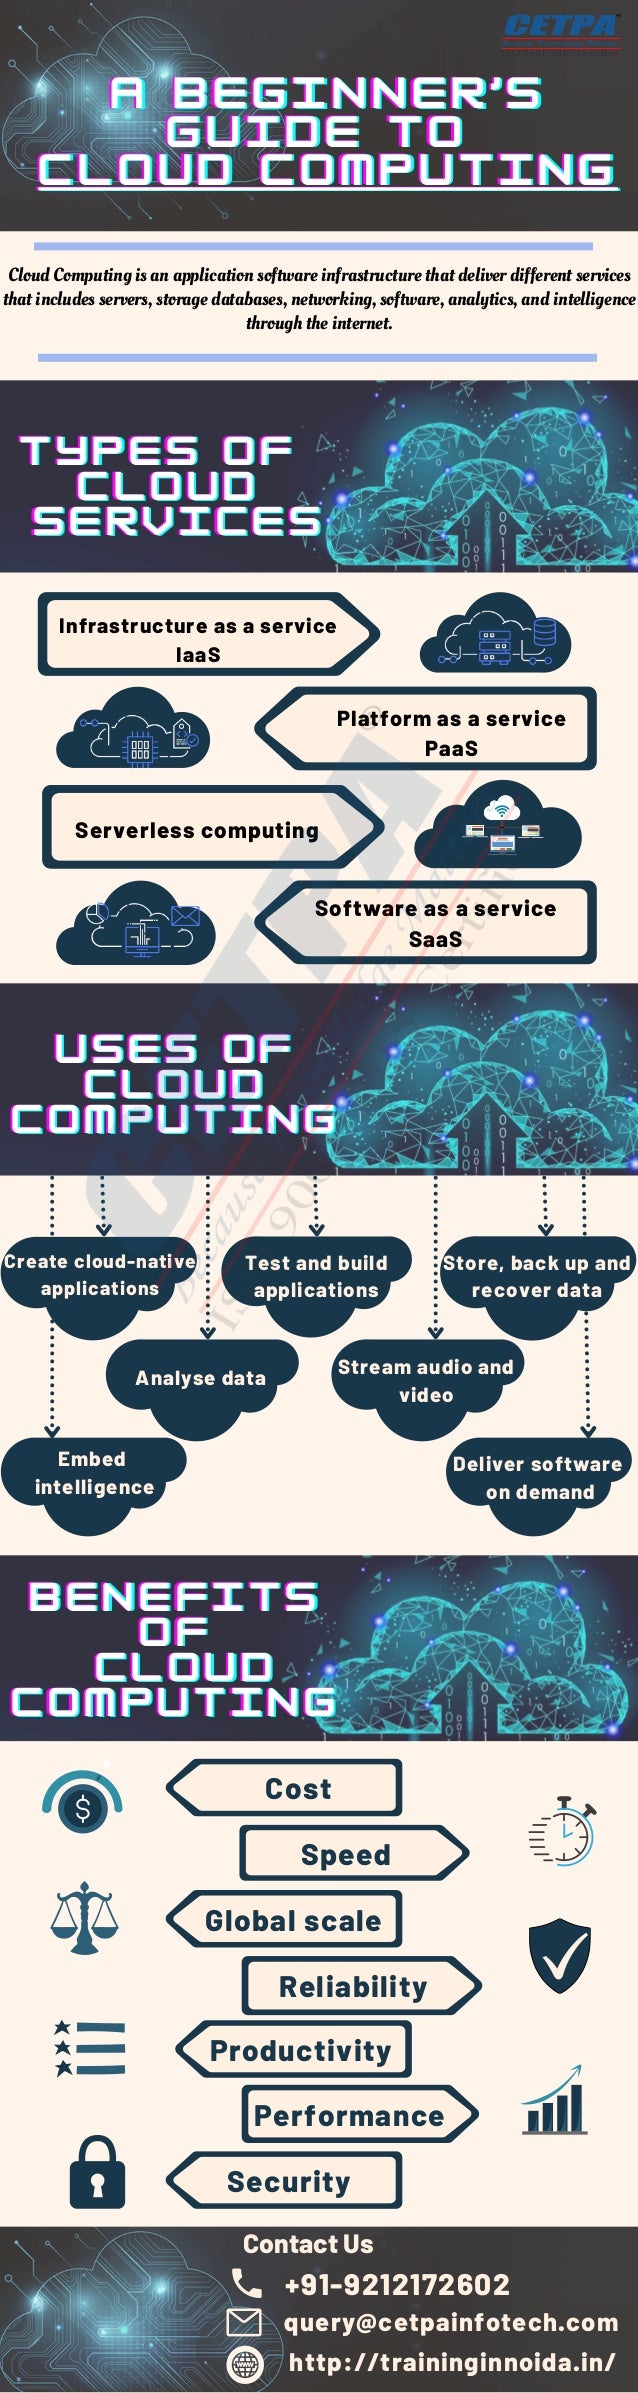 U S E S O F
U S E S O F
U S E S O F
C L O U D
C L O U D
C L O U D
C O M P U T I N G
C O M P U T I N G
C O M P U T I N G






Infrastructure as a service
IaaS
Cloud Computing is an application software infrastructure that deliver different services
that includes servers, storage databases, networking, software, analytics, and intelligence
through the internet.
Contact Us
A B E G I N N E R ’ S
A B E G I N N E R ’ S
A B E G I N N E R ’ S
G U I D E T O
G U I D E T O
G U I D E T O
C L O U D C O M P U T I N G
C L O U D C O M P U T I N G
C L O U D C O M P U T I N G






T Y P E S O F
T Y P E S O F
T Y P E S O F
C L O U D
C L O U D
C L O U D
S E R V I C E S
S E R V I C E S
S E R V I C E S
Serverless computing


Platform as a service
PaaS


Software as a service
SaaS
Create cloud-native
applications


Test and build
applications


Store, back up and
recover data


Analyse data


Stream audio and
video


Deliver software
on demand


Embed
intelligence


B E N E F I T S
B E N E F I T S
B E N E F I T S
O F
O F
O F
C L O U D
C L O U D
C L O U D
C O M P U T I N G
C O M P U T I N G
C O M P U T I N G






Cost
Speed
Global scale
Reliability
Productivity
Performance
Security
+91-9212172602
query@cetpainfotech.com
http://traininginnoida.in/
 